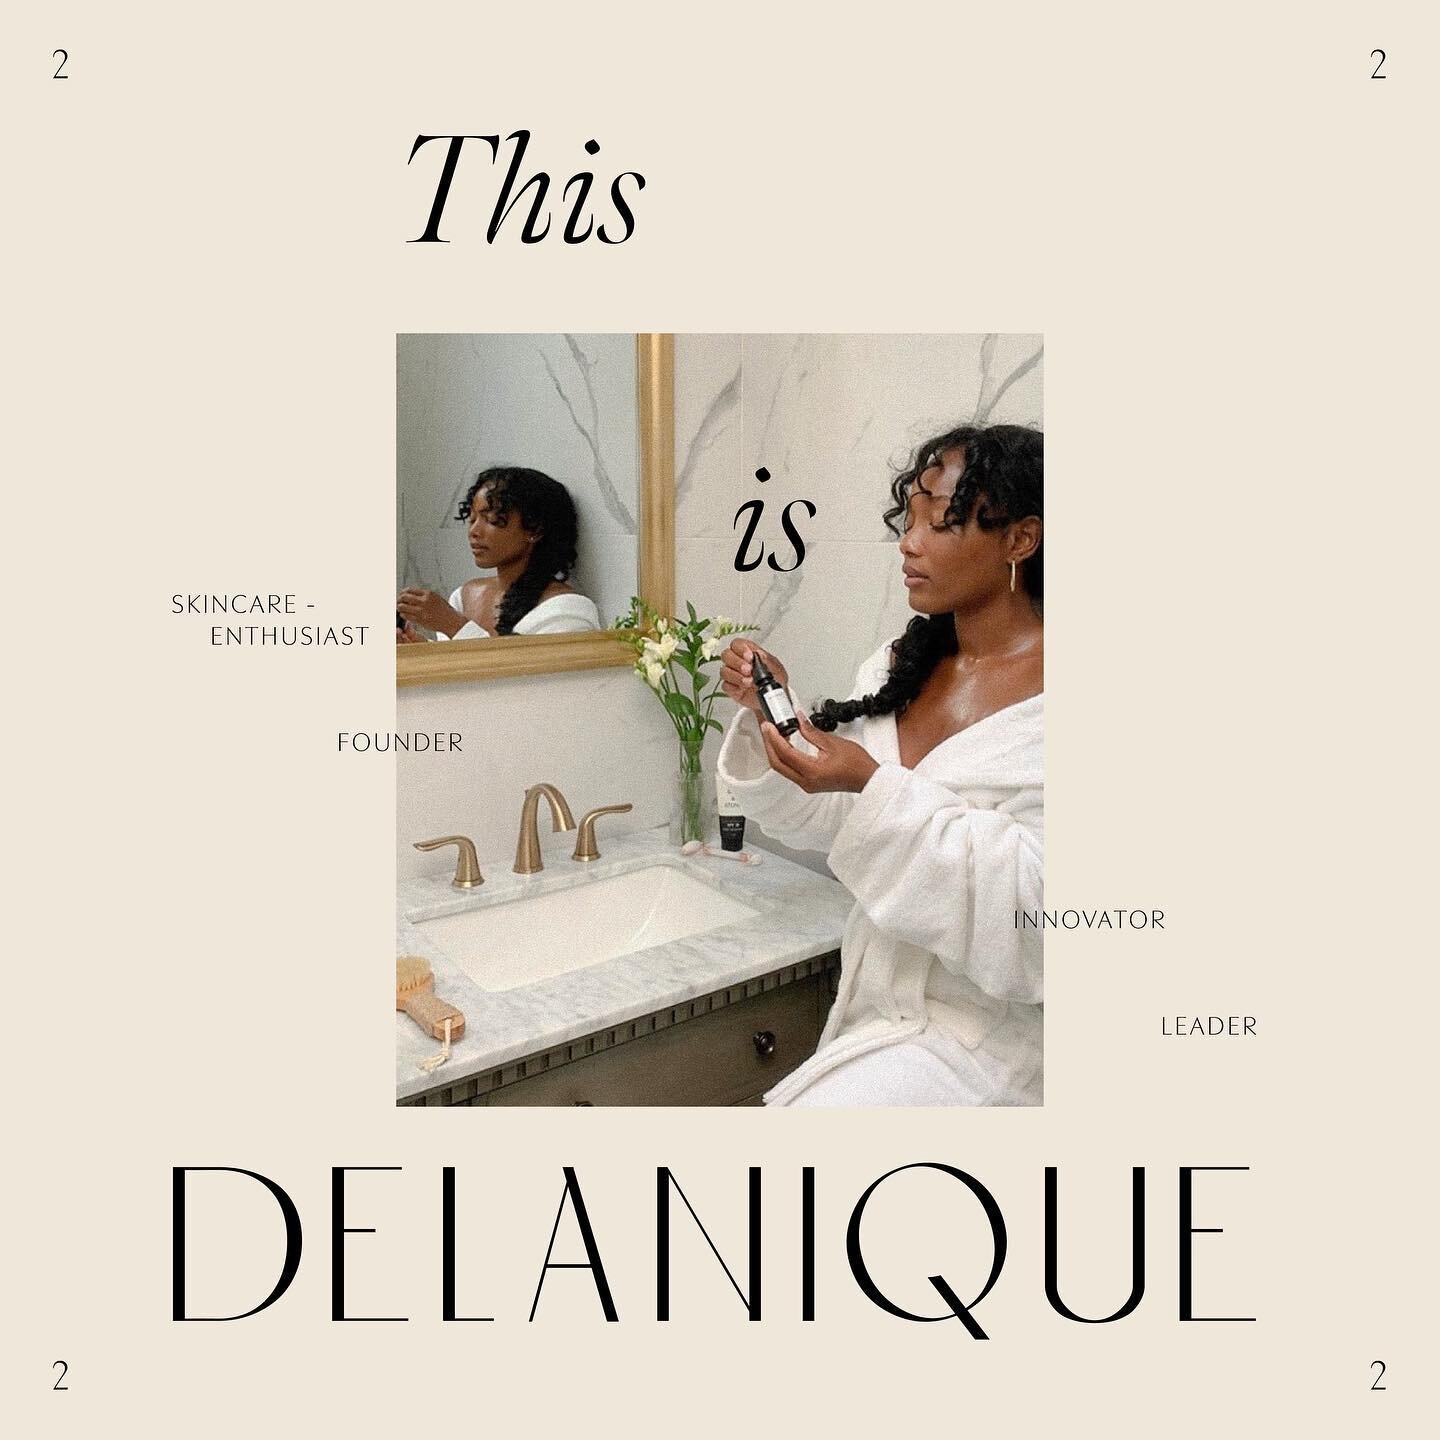 Meet Delanique, the second feature in our series dedicated to recognizing and celebrating Black History Month. 

As we introduce you to her and the community-driven, skincare platform she&rsquo;s built, we hope you enjoy getting to know her as much a